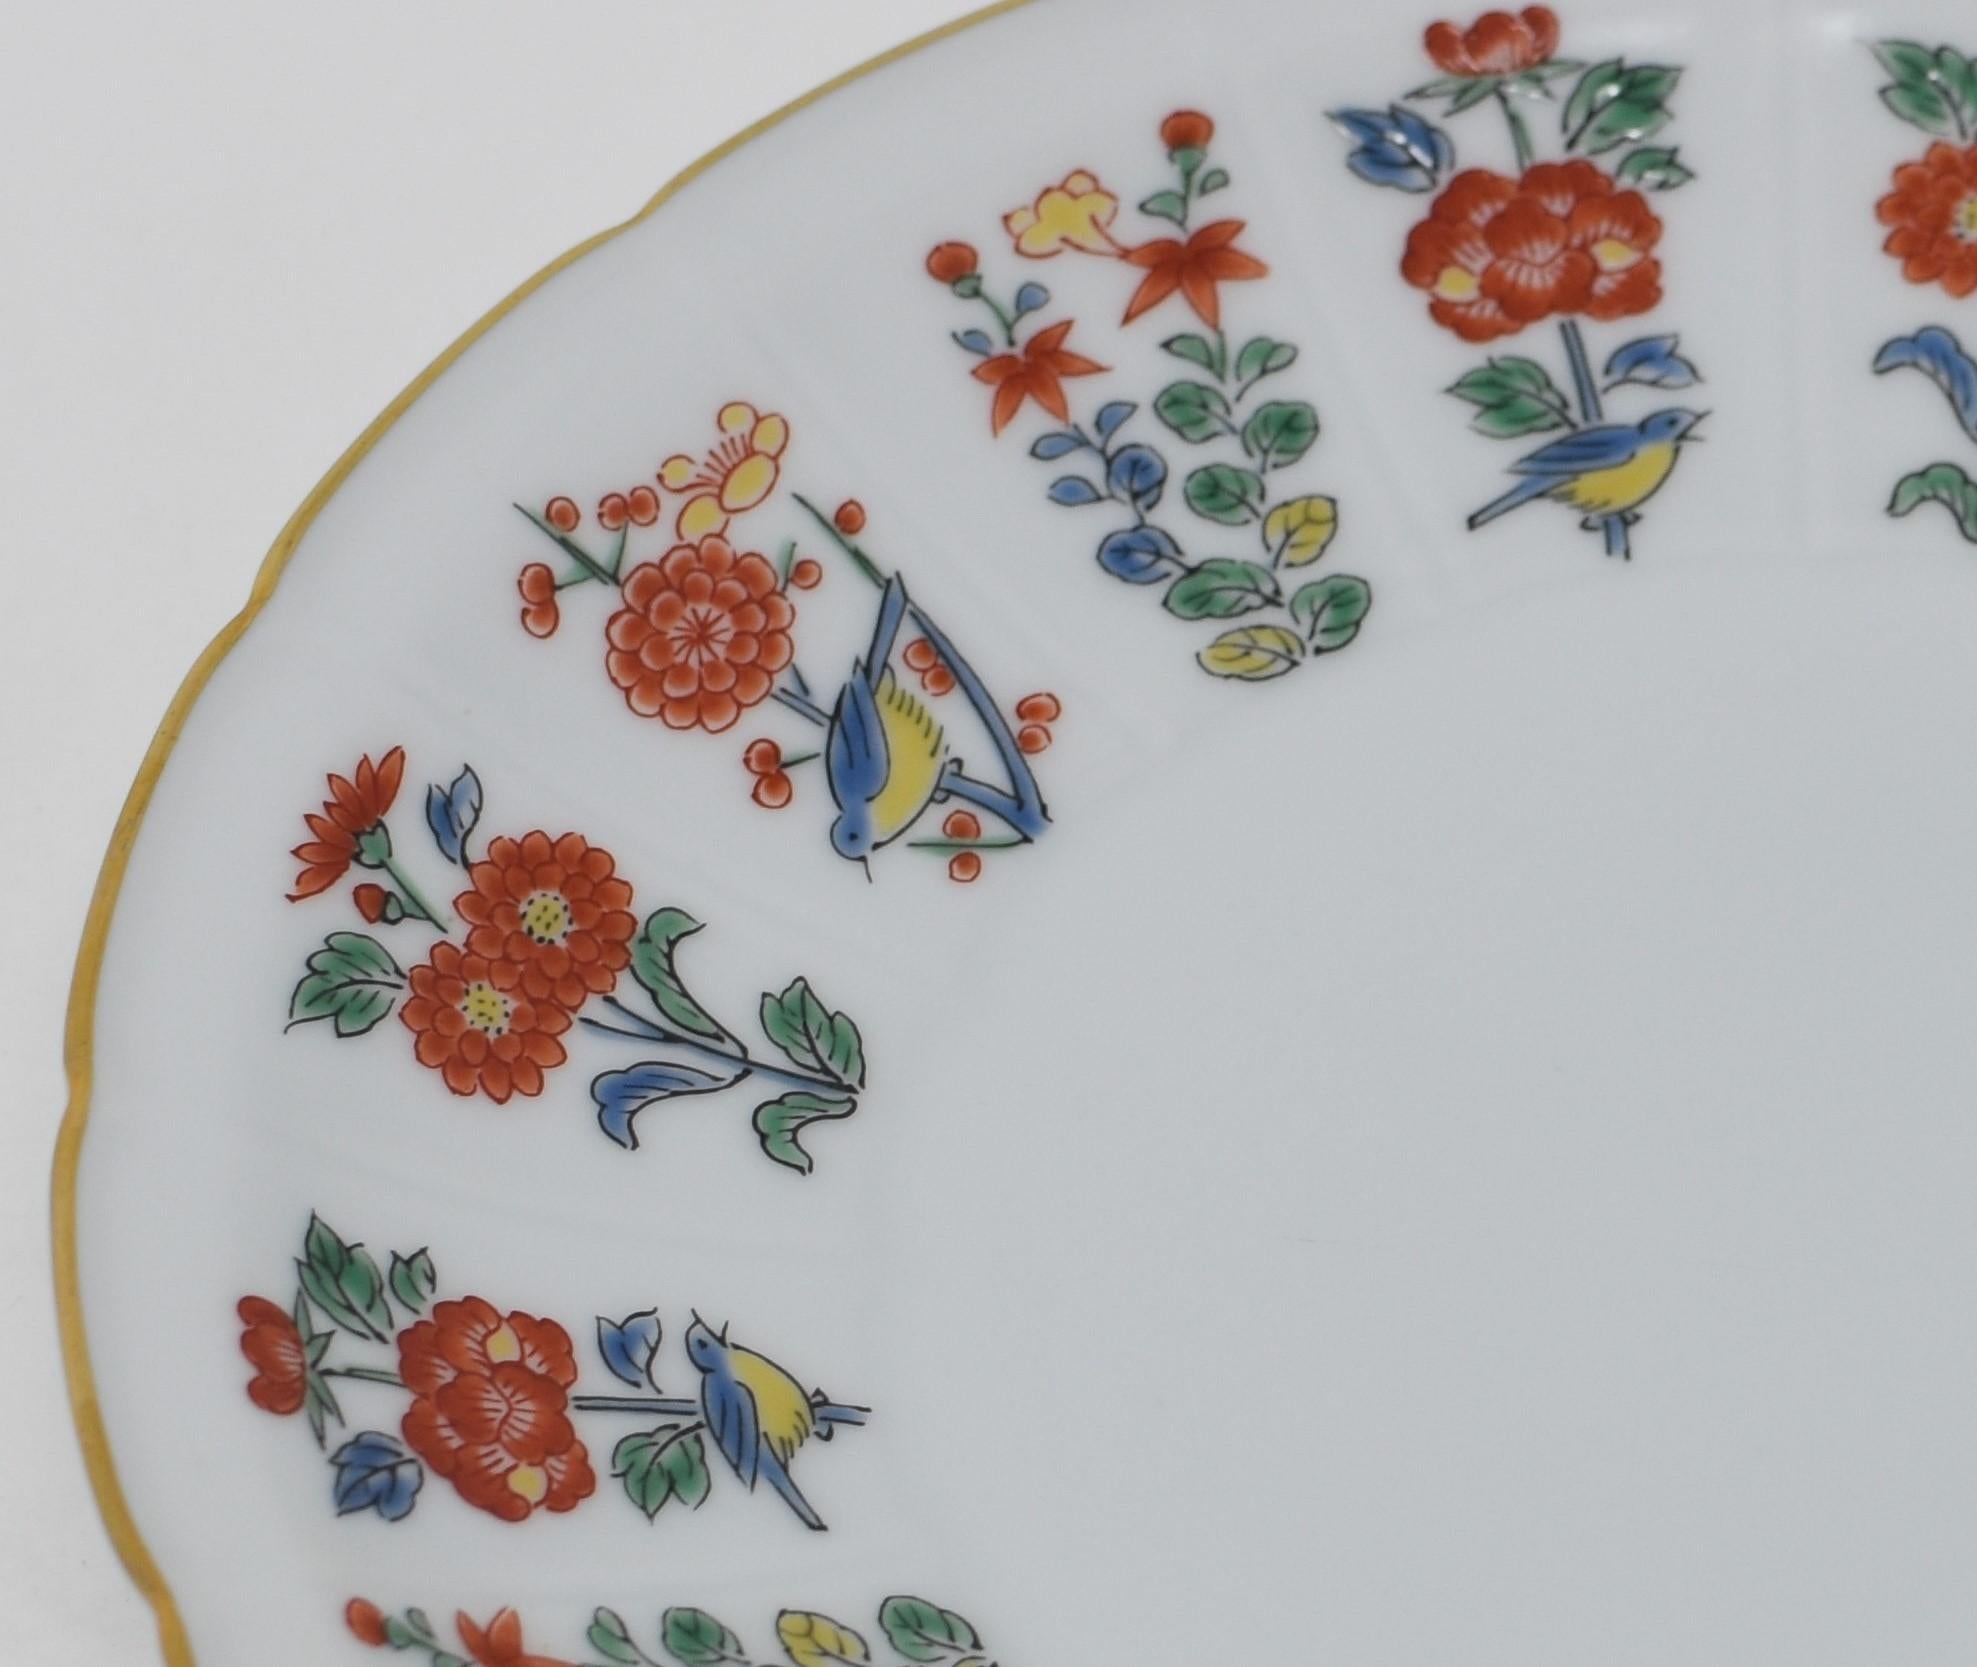 Exquisite contemporary Japnese gilded hand painted Porcelain dessert plate in vivid red, blue and green generously decorated with gold, with an intricate flower and gold pattern. The pattern of this stunning set, scalloped around the rim of the cup